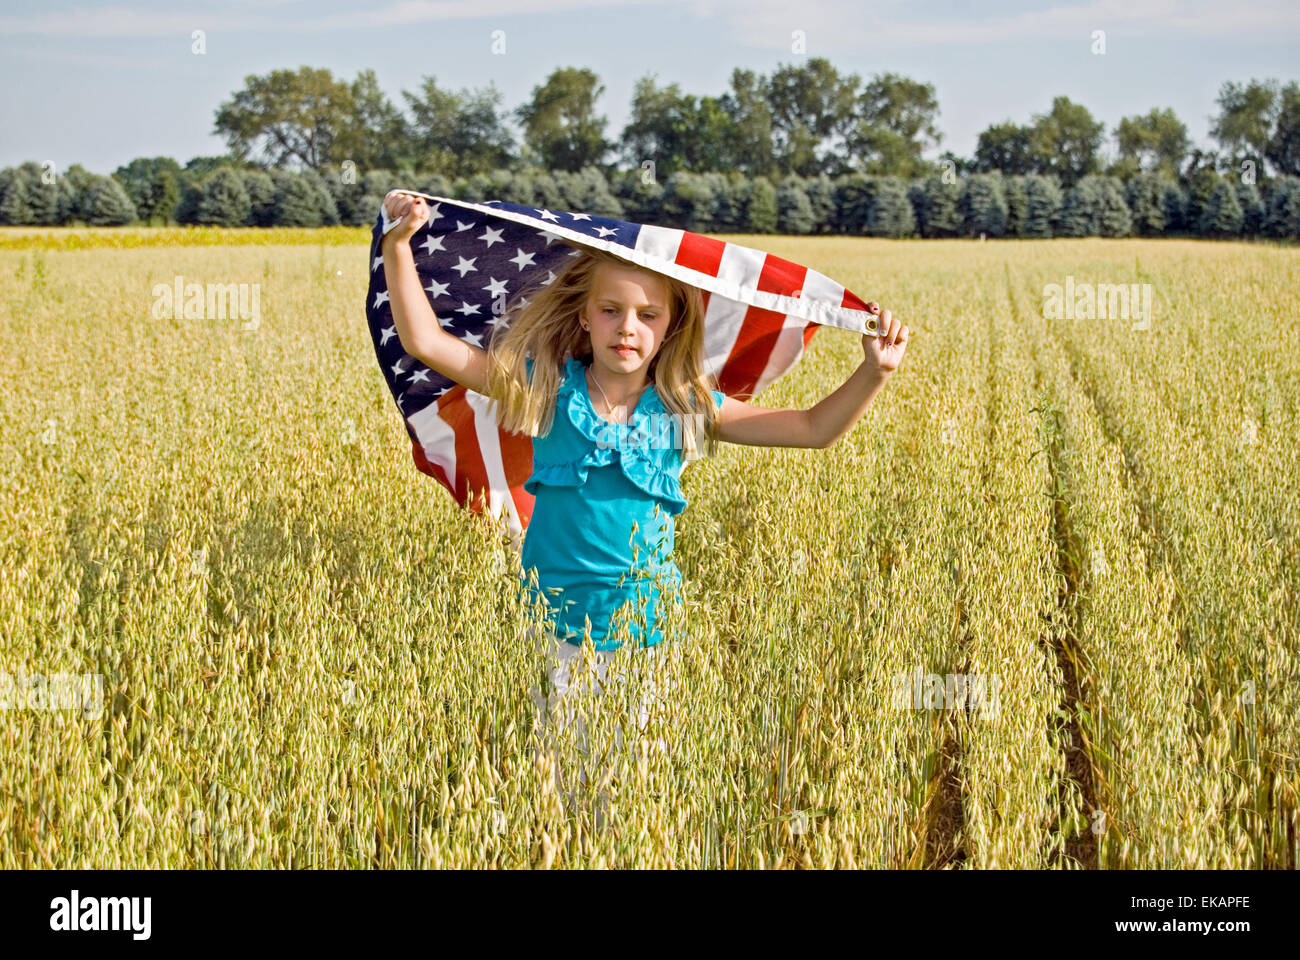 Young Caucasian girl running in a field of wheat with American flag. Stock Photo